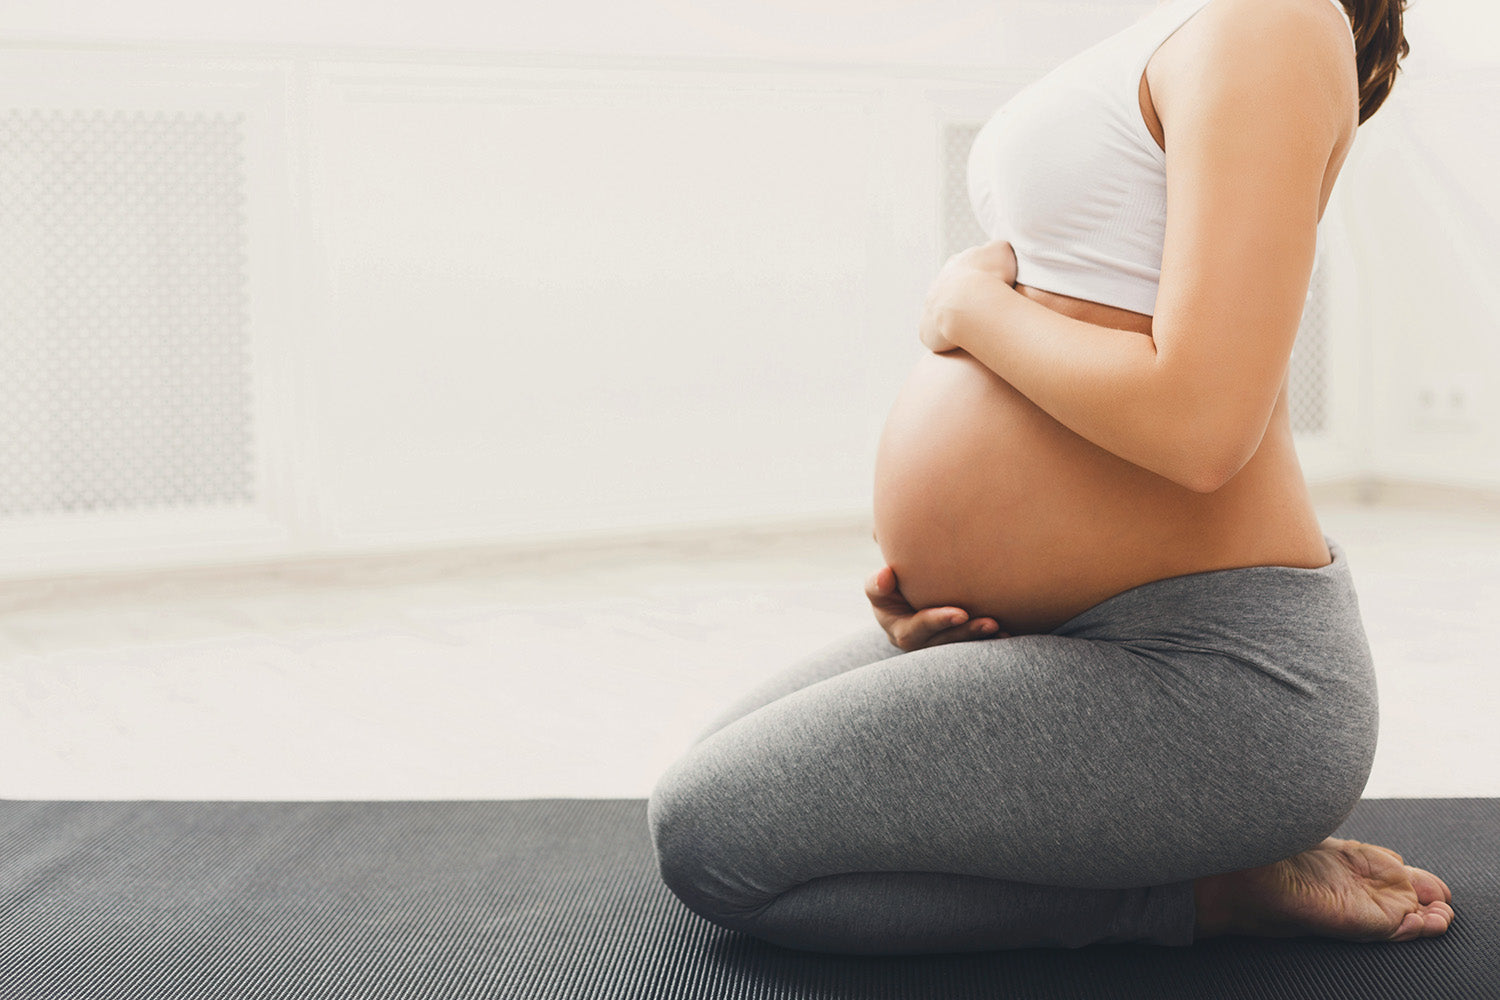 Study: Yoga During Pregnancy: Effects on Maternal Comfort, Labor